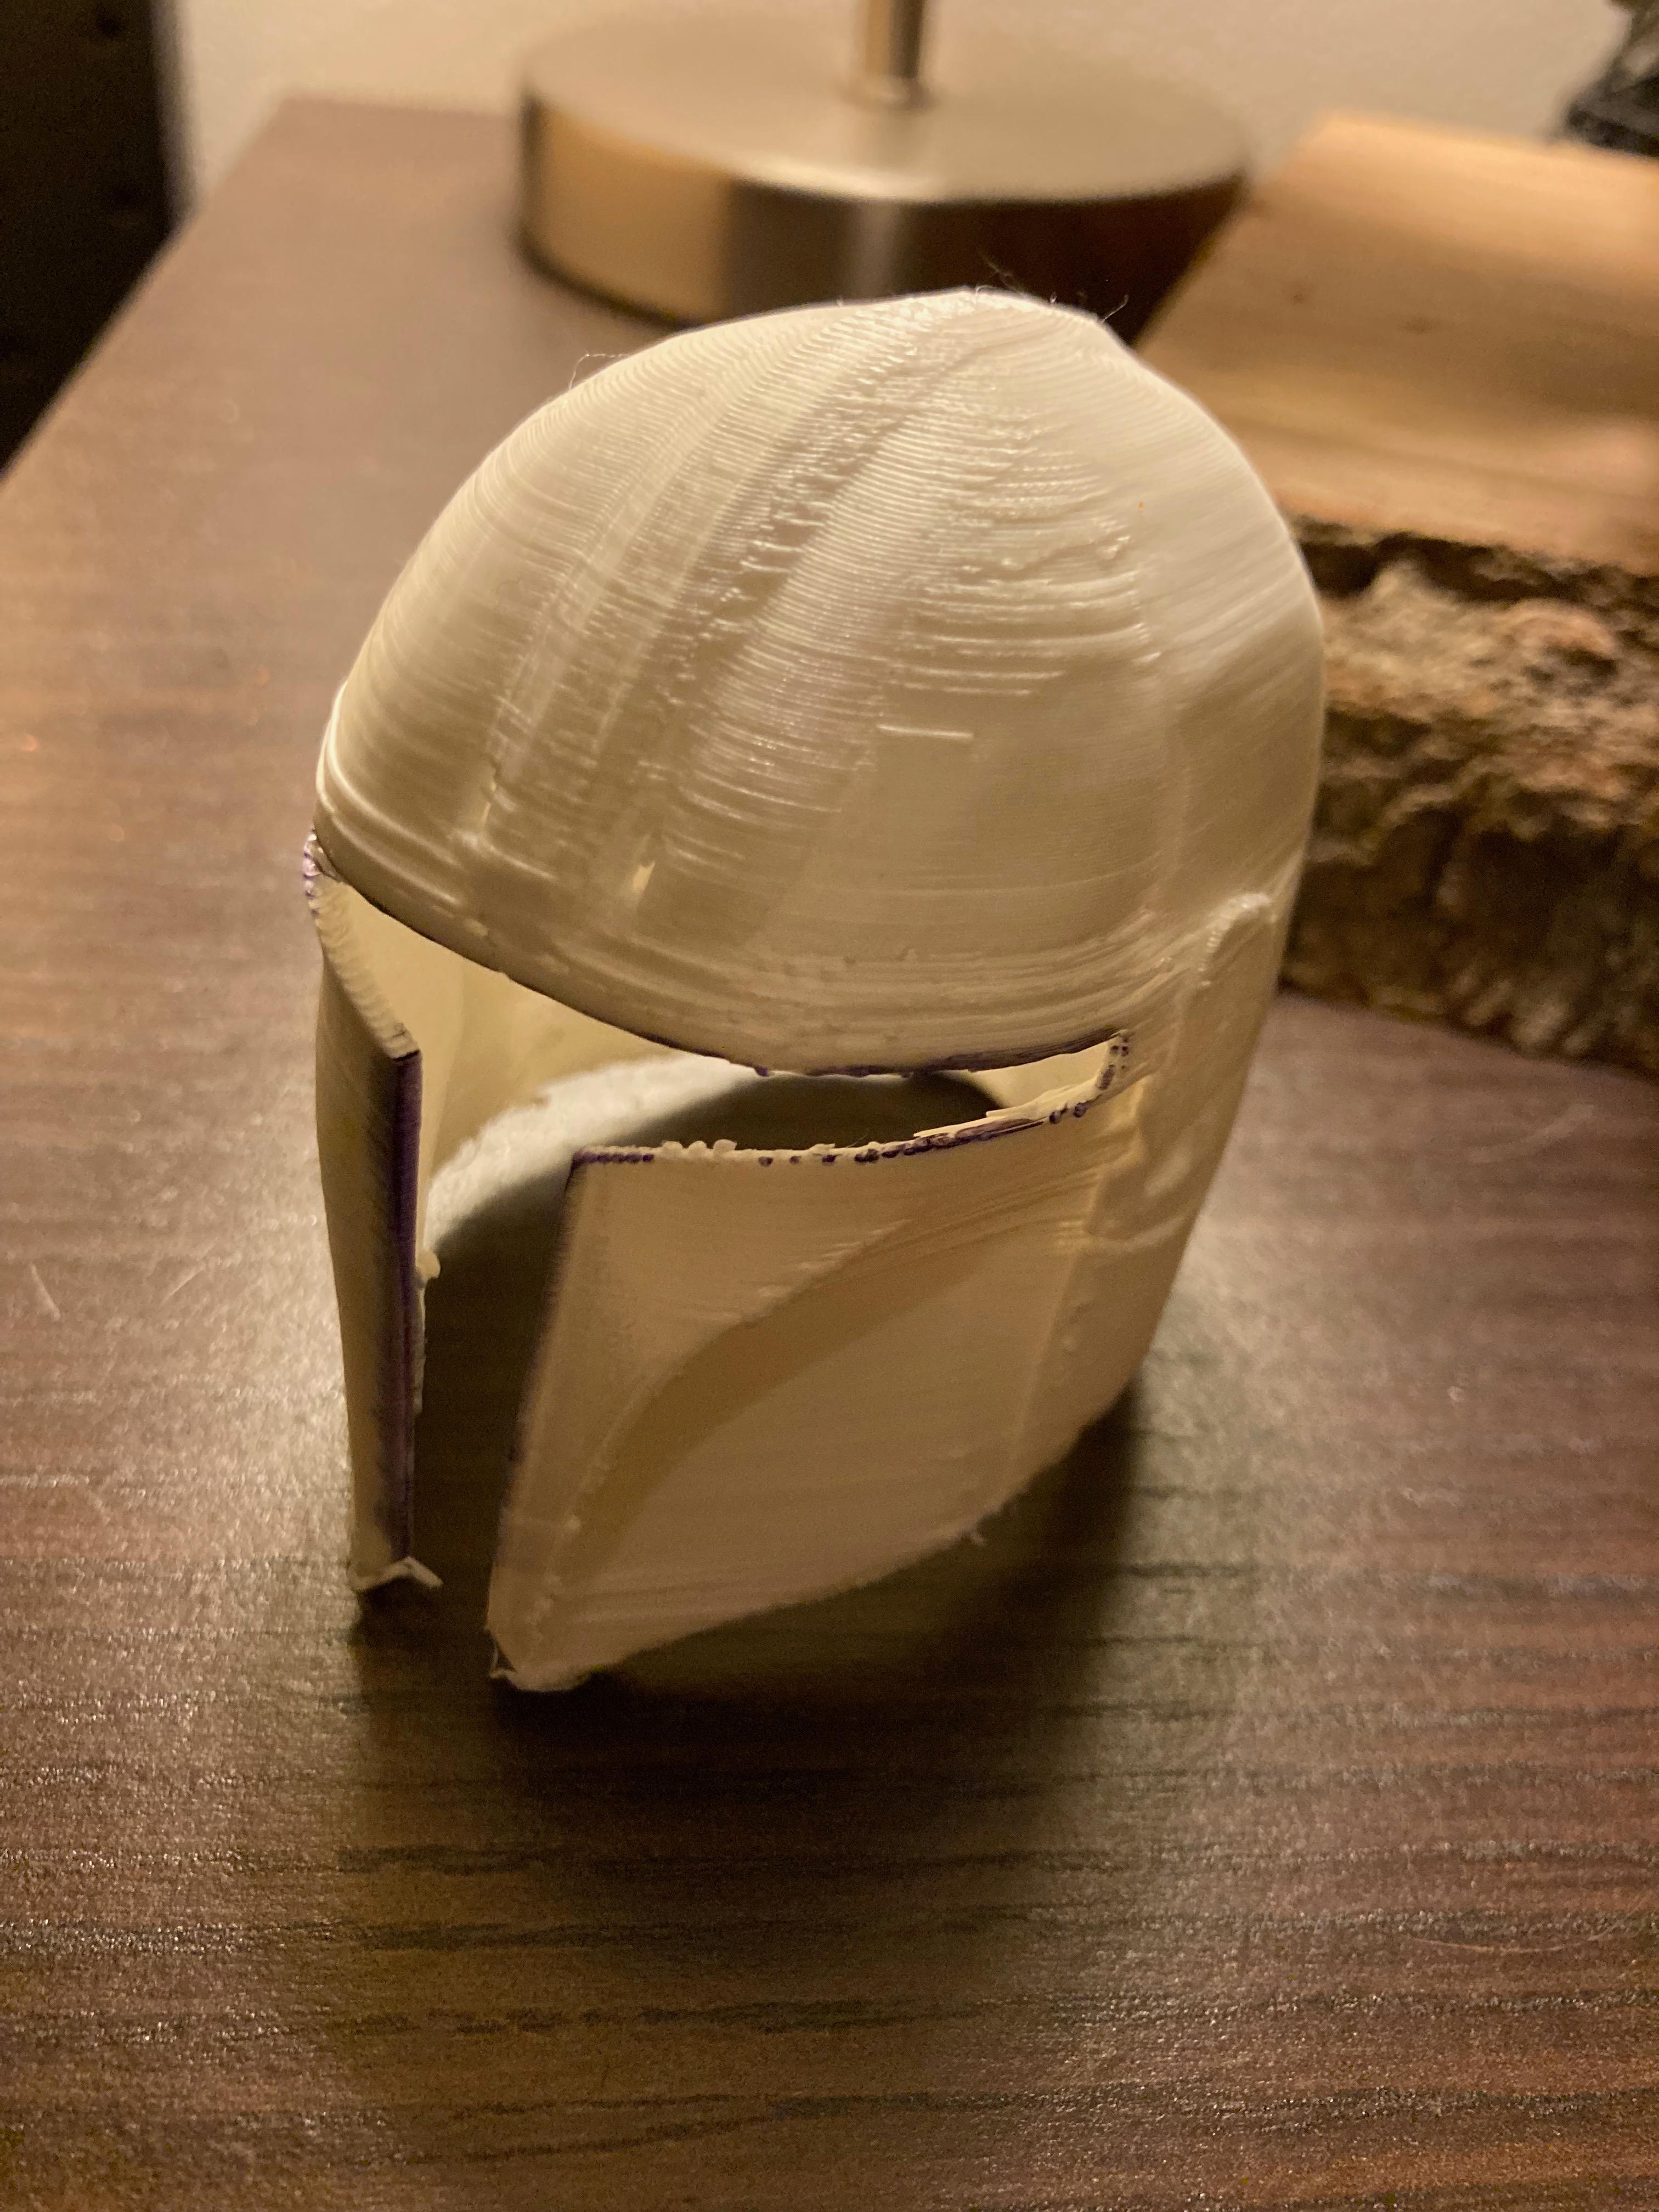 Mandalorian Helmet - Scaled it down to 25% of its original for my son to put on his action figures.  - 3d model